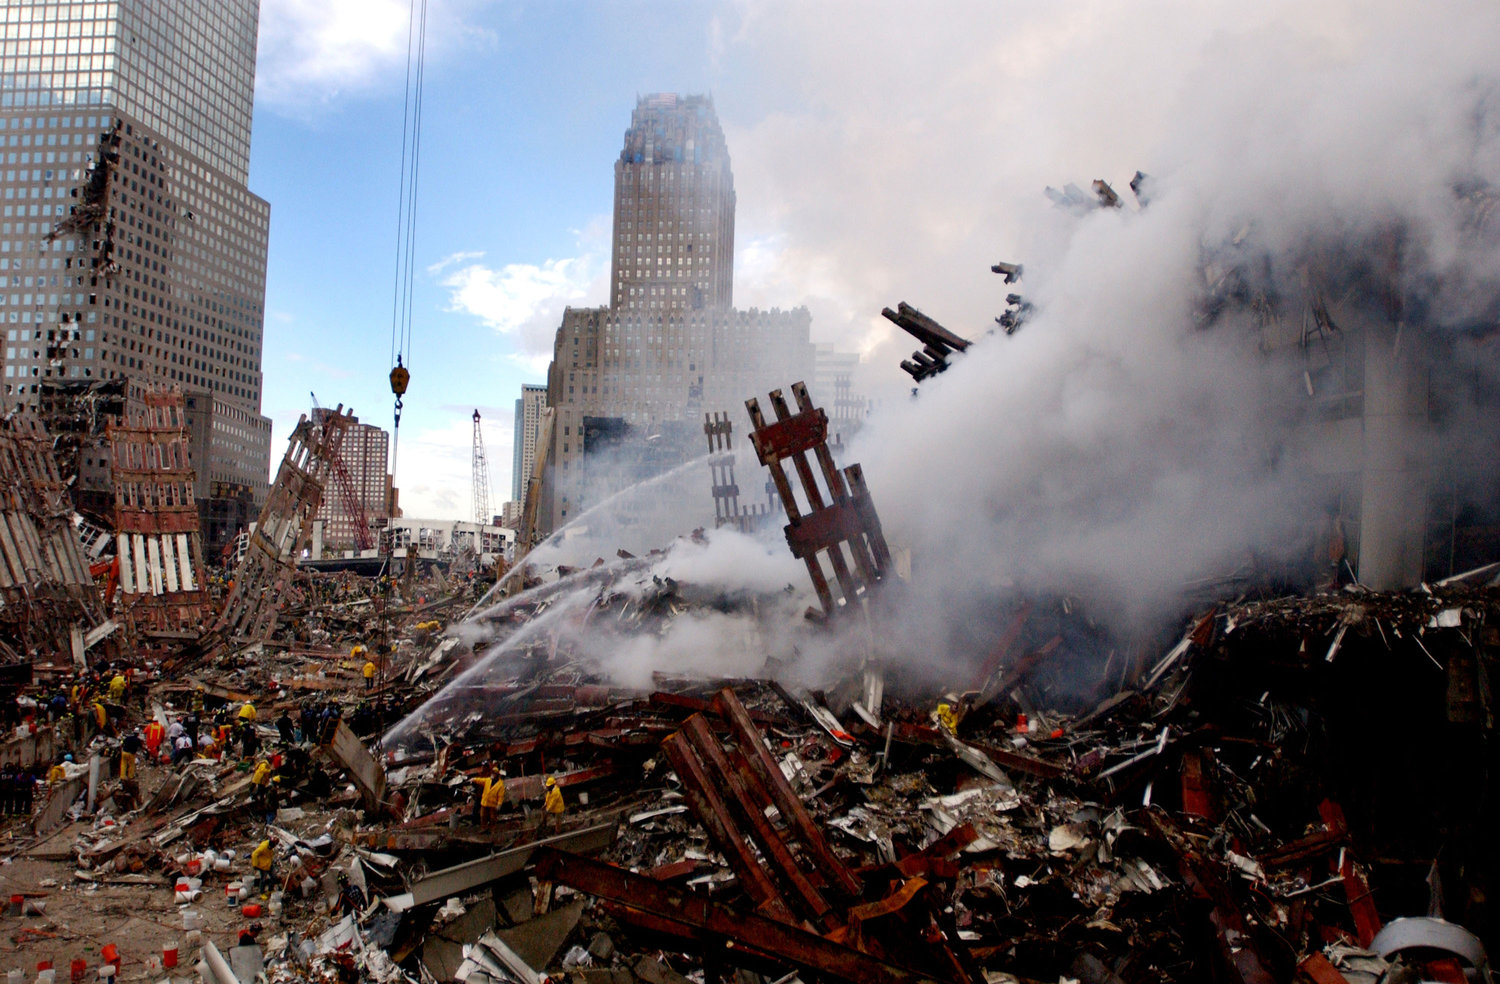 Fires still burn amidst the rubble of the World Trade Center on Sept. 13, 2001, days after the Sept. 11, 2001, terrorist attack. (Jim Watson/U.S. Navy/Getty Images/TNS)